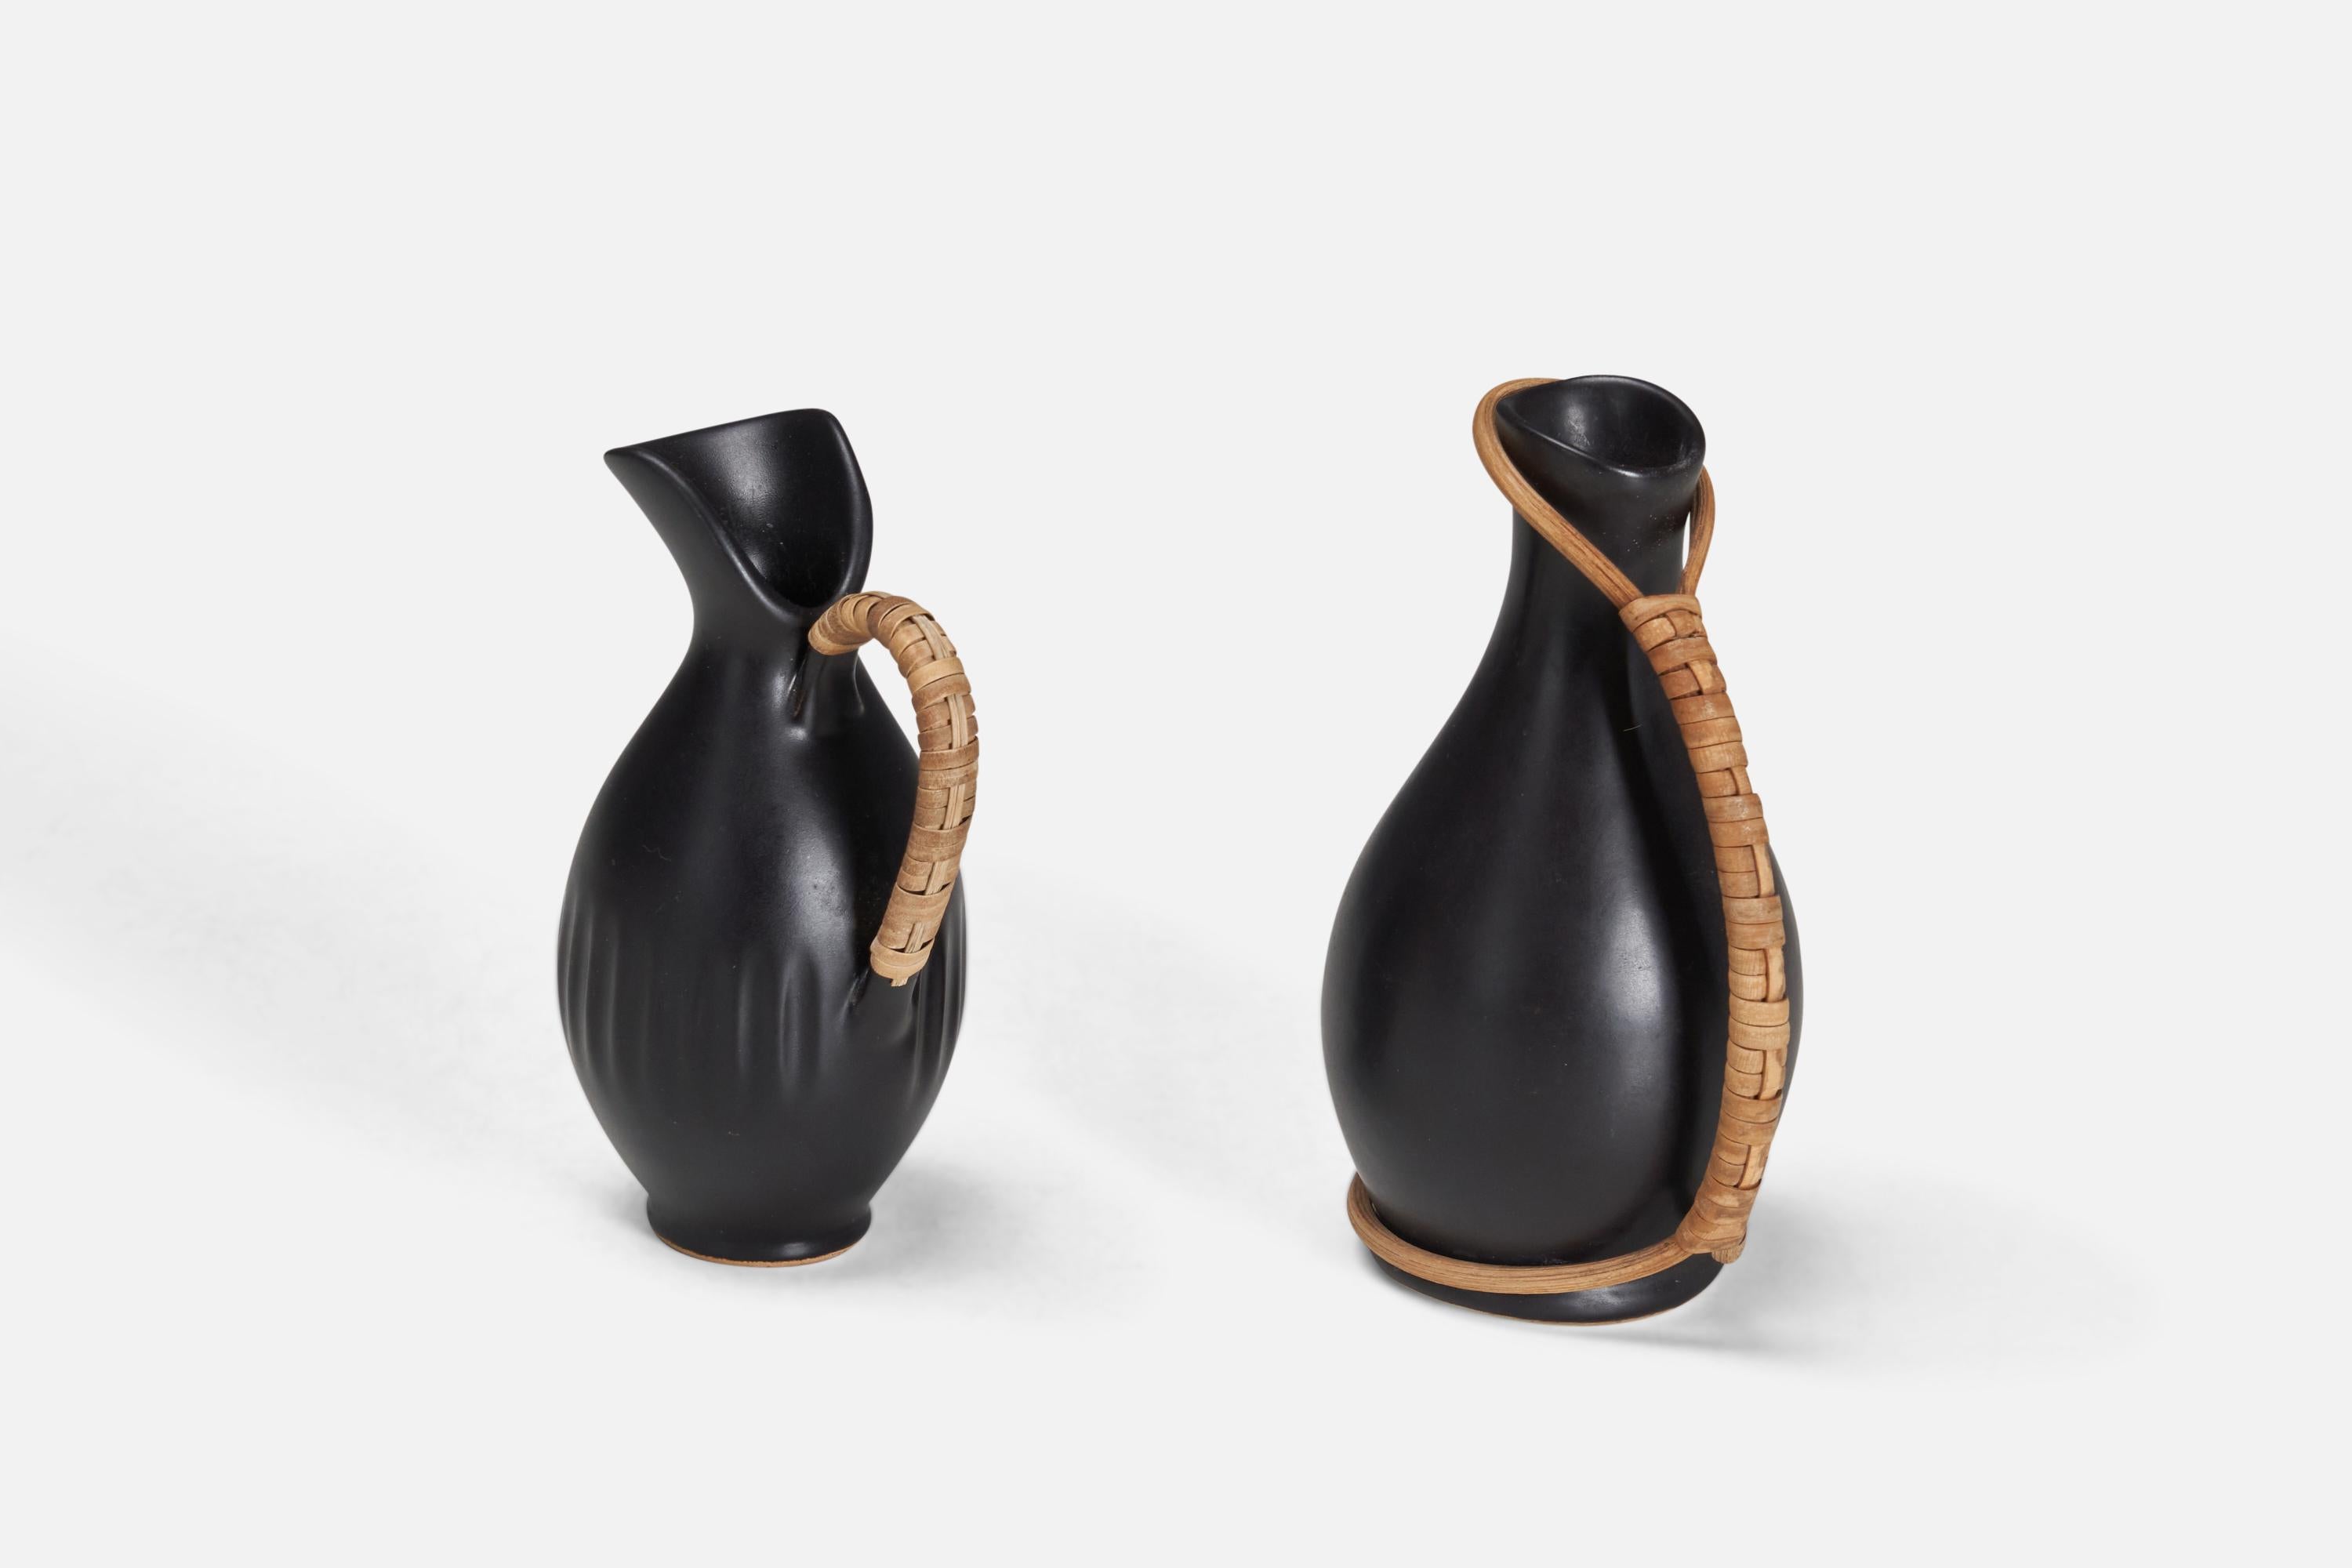 Bofa Keramik, Miniature Pitchers, Bornholm, Denmark, 1960s. One with paper label, other dated 1960.

Stated dimensions of taller example.

Other designers of the period include Ettore Sottsass, Carl Harry Stålhane, Lisa Larsson, Axel Salto, and